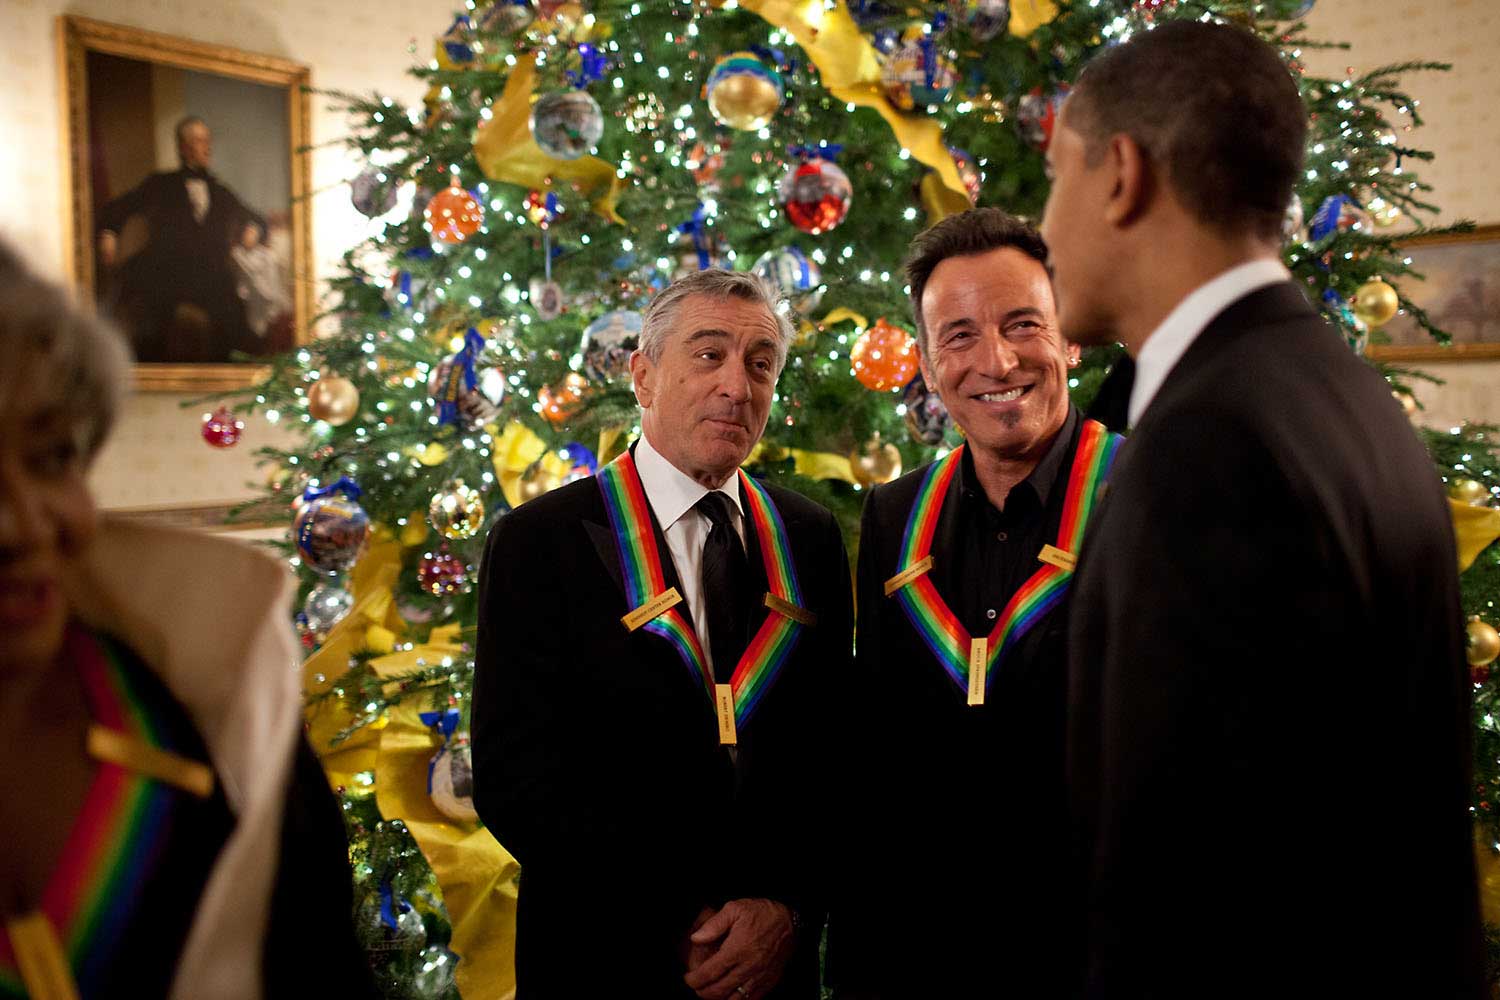 “Having seen more than 25 Bruce Springsteen concerts since 1978 and having seen just about every movie Robert DeNiro has ever made, it was a great thrill to be in their presence as the President greeted them before the Kennedy Center Honors at the White House, Dec. 6, 2009.”